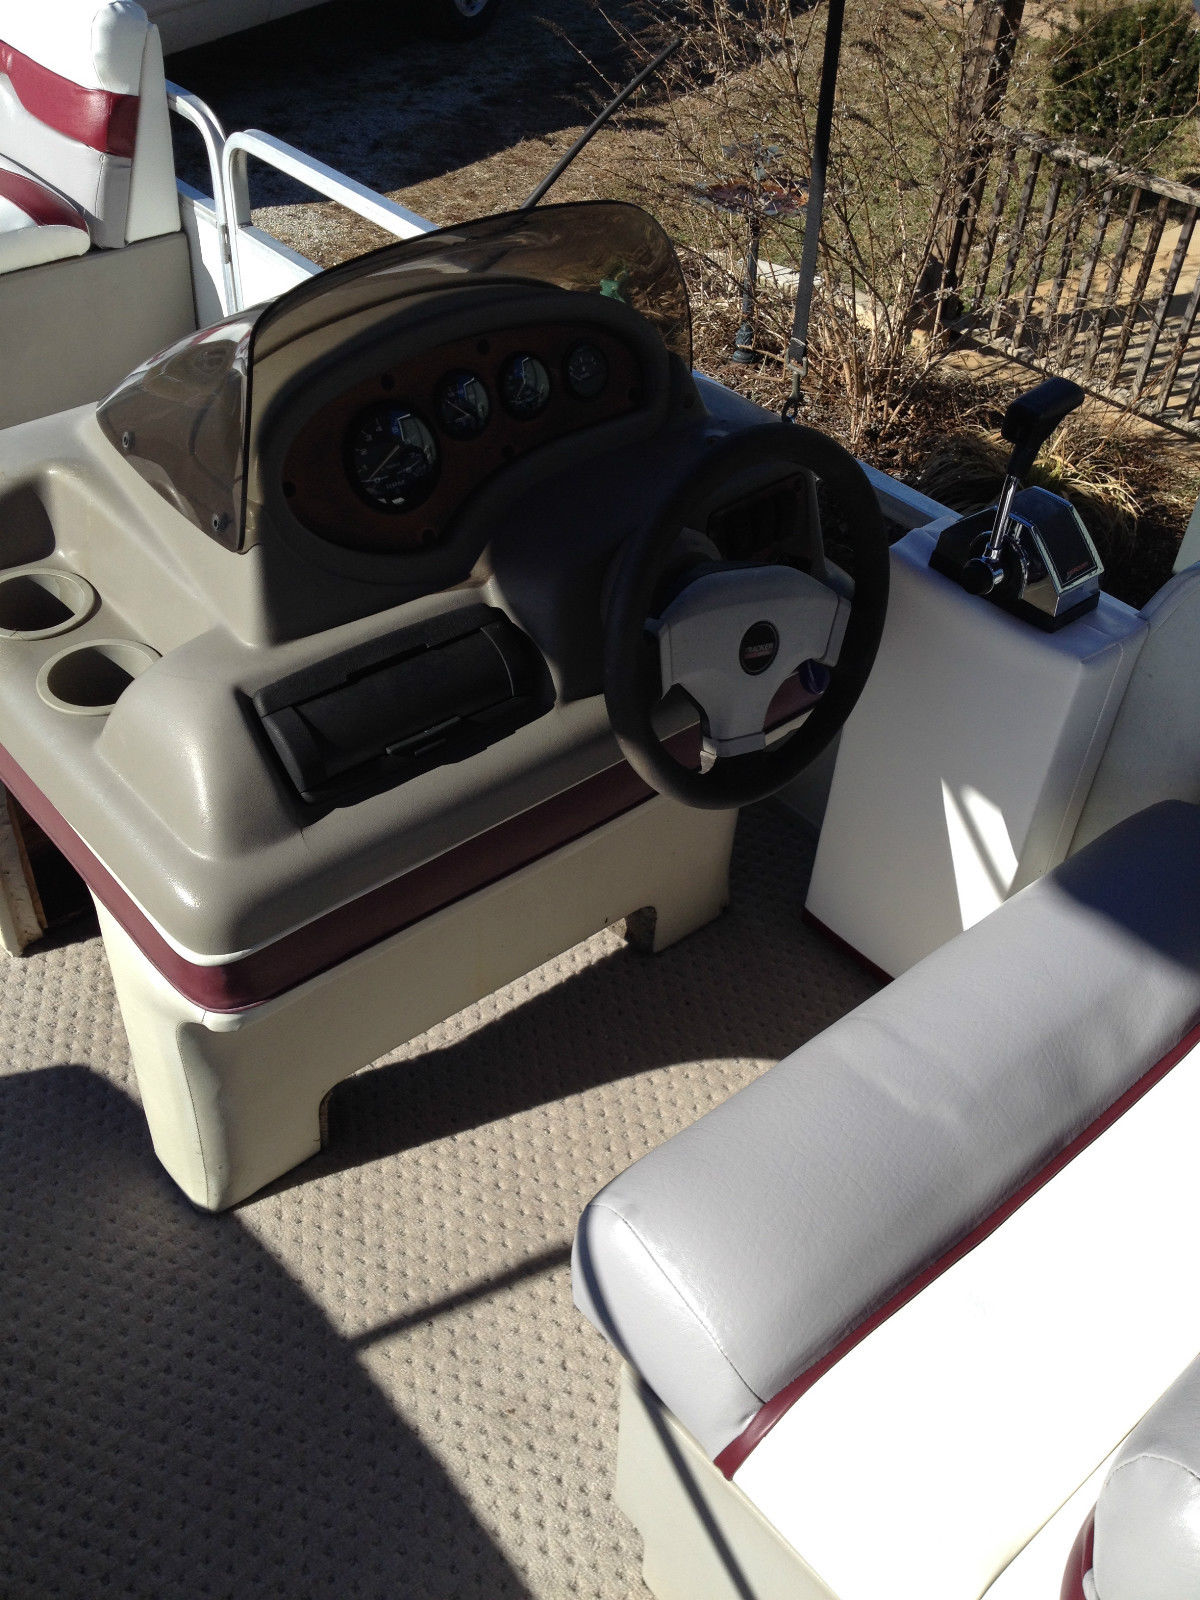 Sun Tracker Pontoon Boat 1998 for sale for $6,500 - Boats 